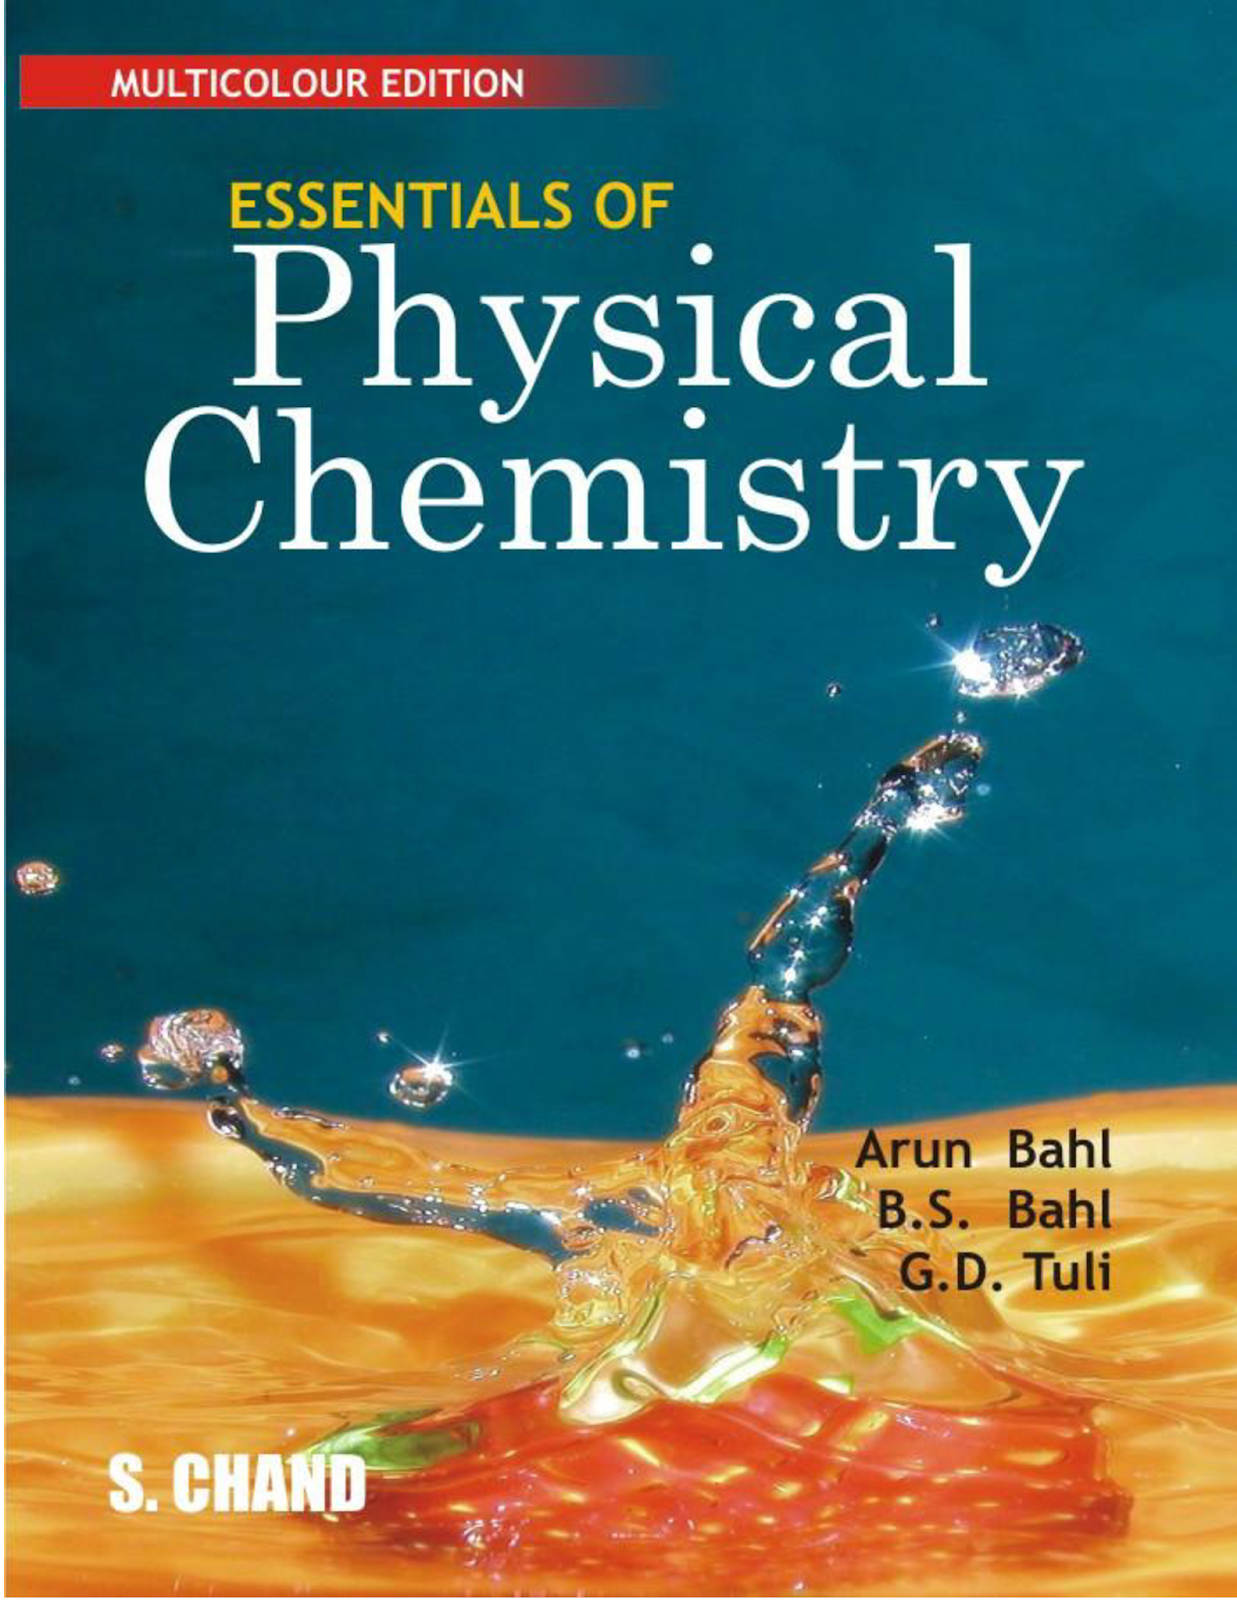 Physical chemical. Physical Chemistry. Book of Chemistry and physics. Physical Chemistry for Dummies. Арун химия.